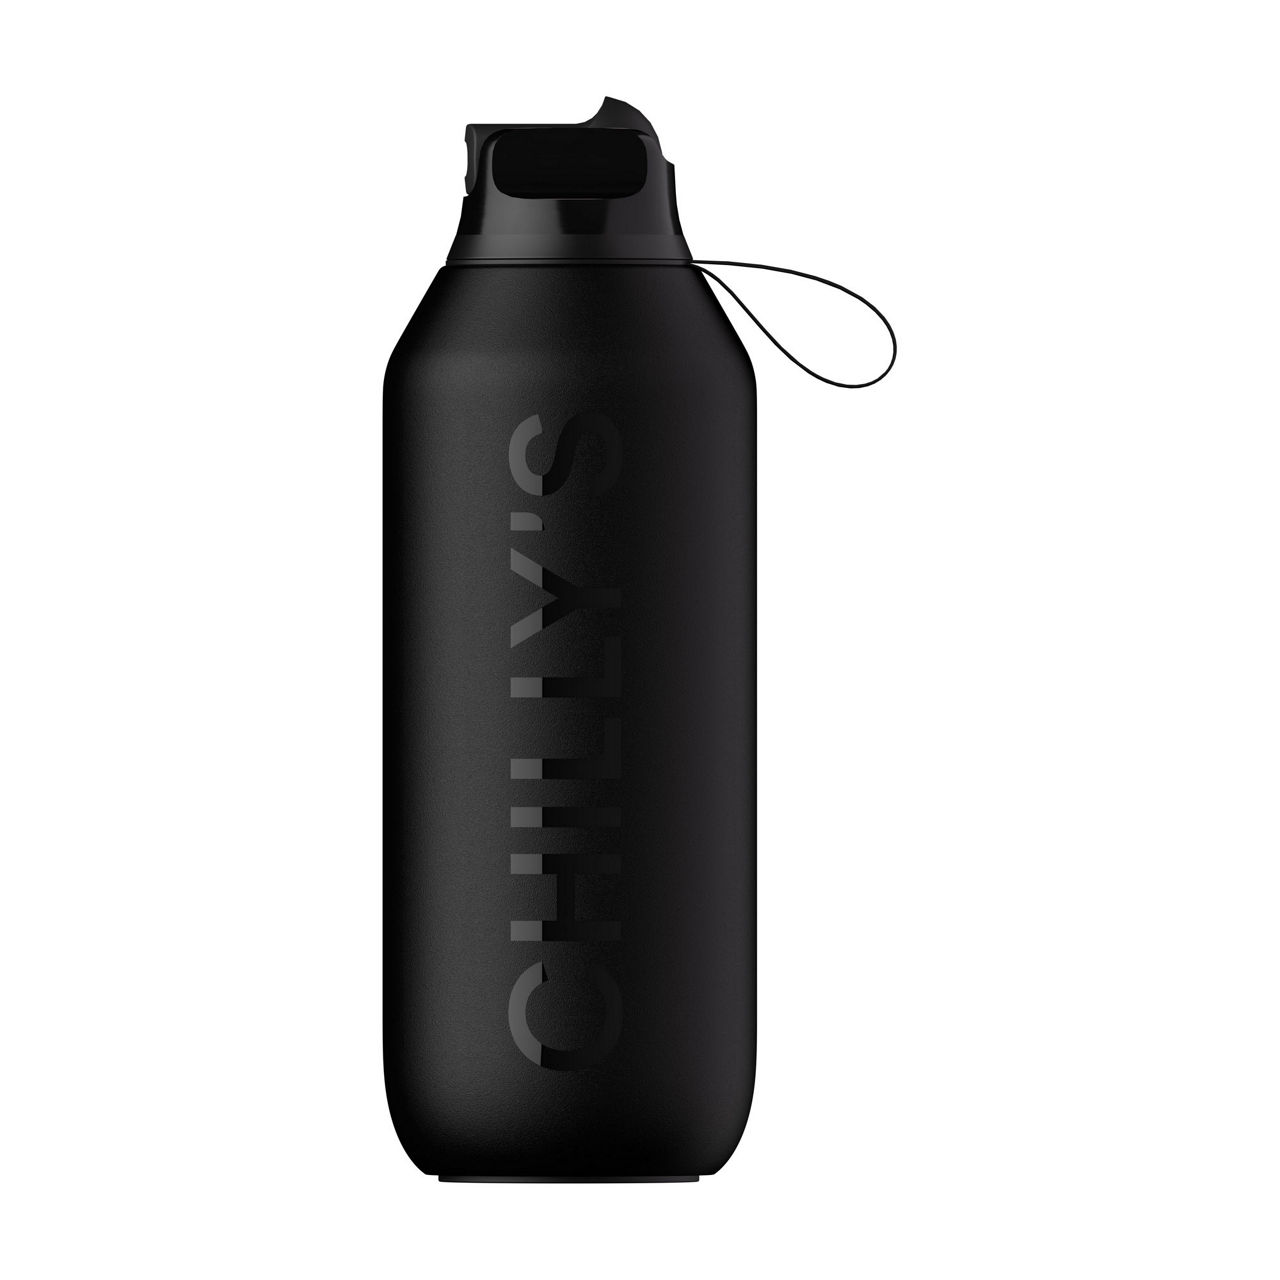  Chillys Series 2 Drinking Bottle Pollen Yellow 500 ml :  Deportes y Actividades al Aire Libre